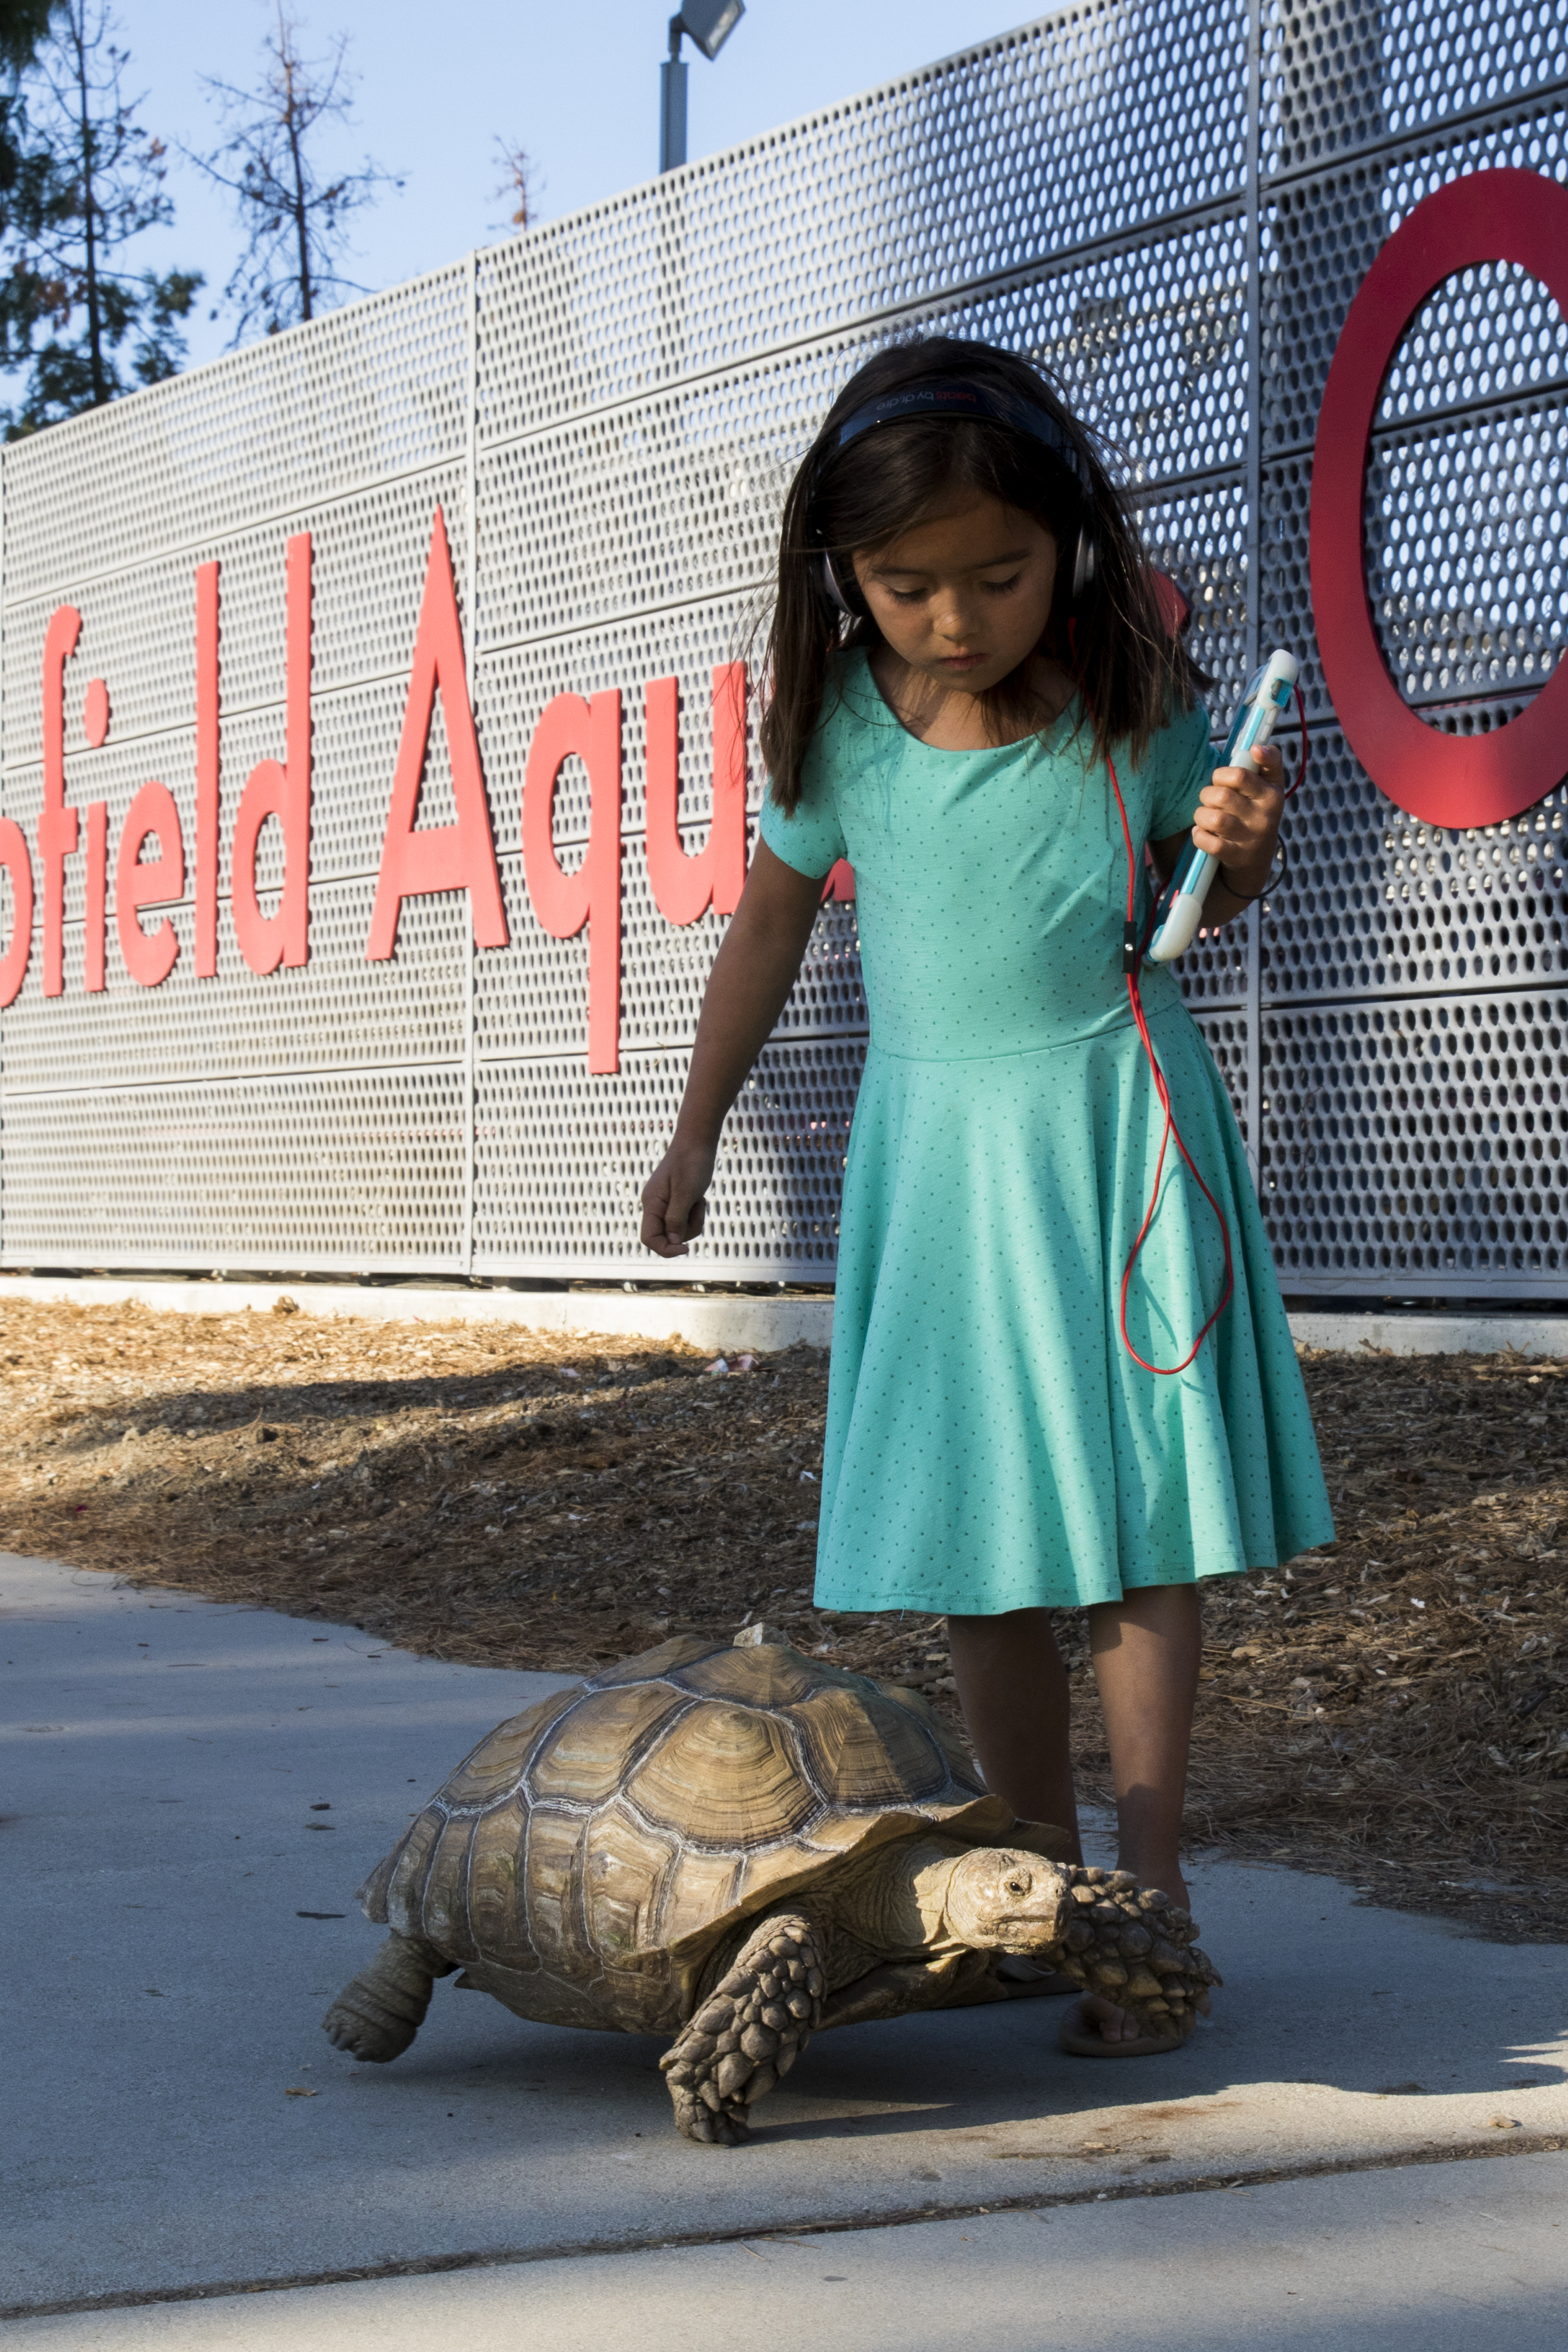  The daugher of the D'Amore family keeps a watchful eye over their family tortoise, Betty at their evacuation center at Pierce College in Woodland Hills, California on November 9, 2018. The D'Amore family evacuated their home in Westlake at 2 AM the 